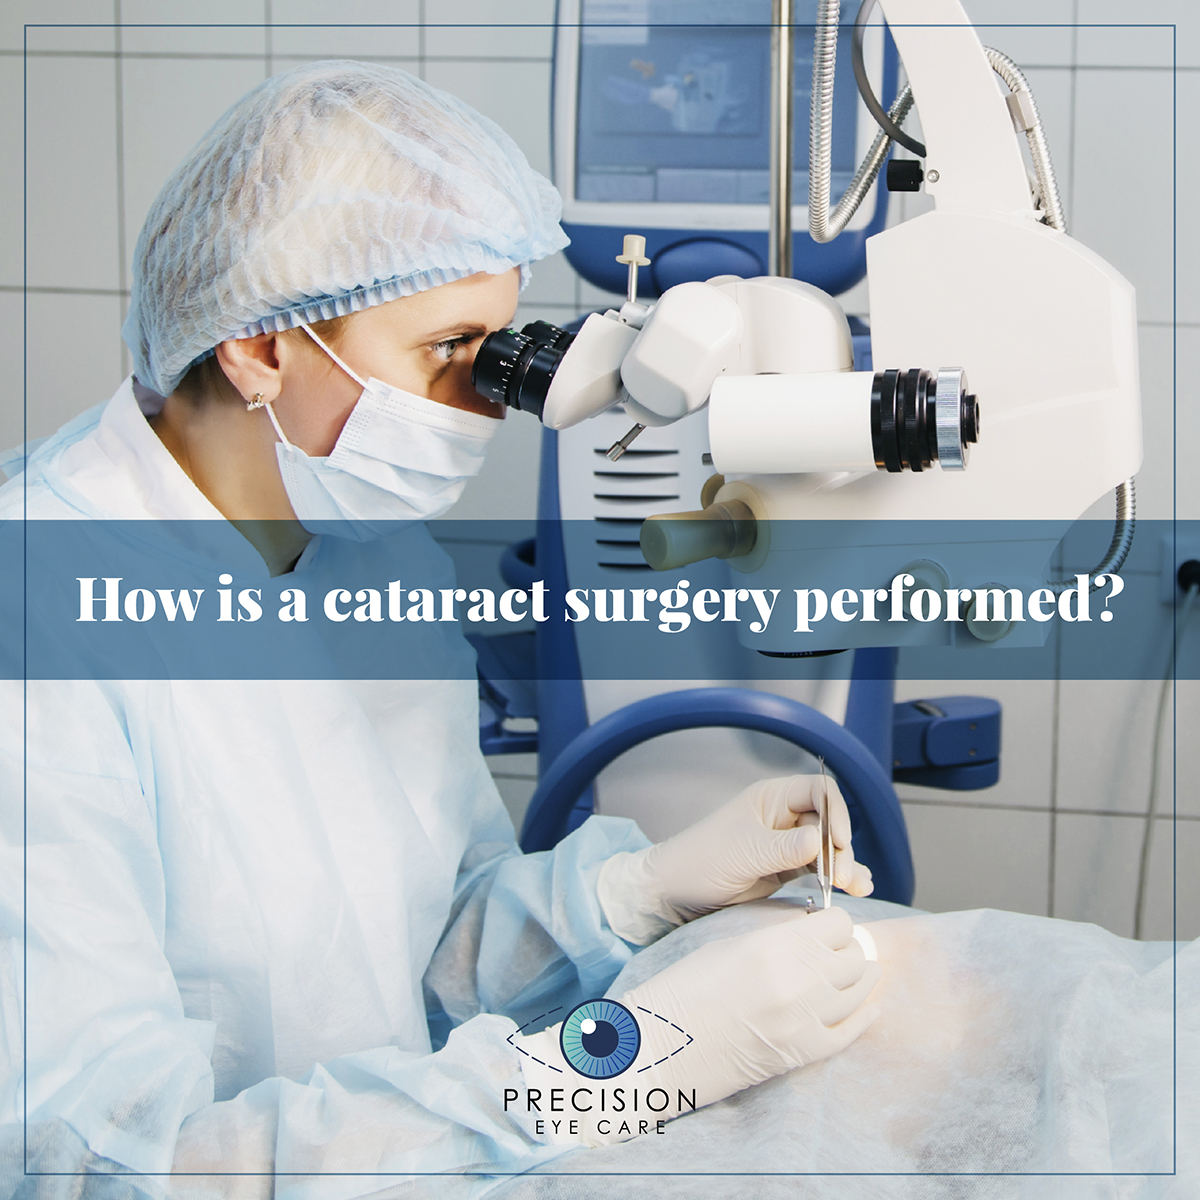 How is a cataract surgery performed?